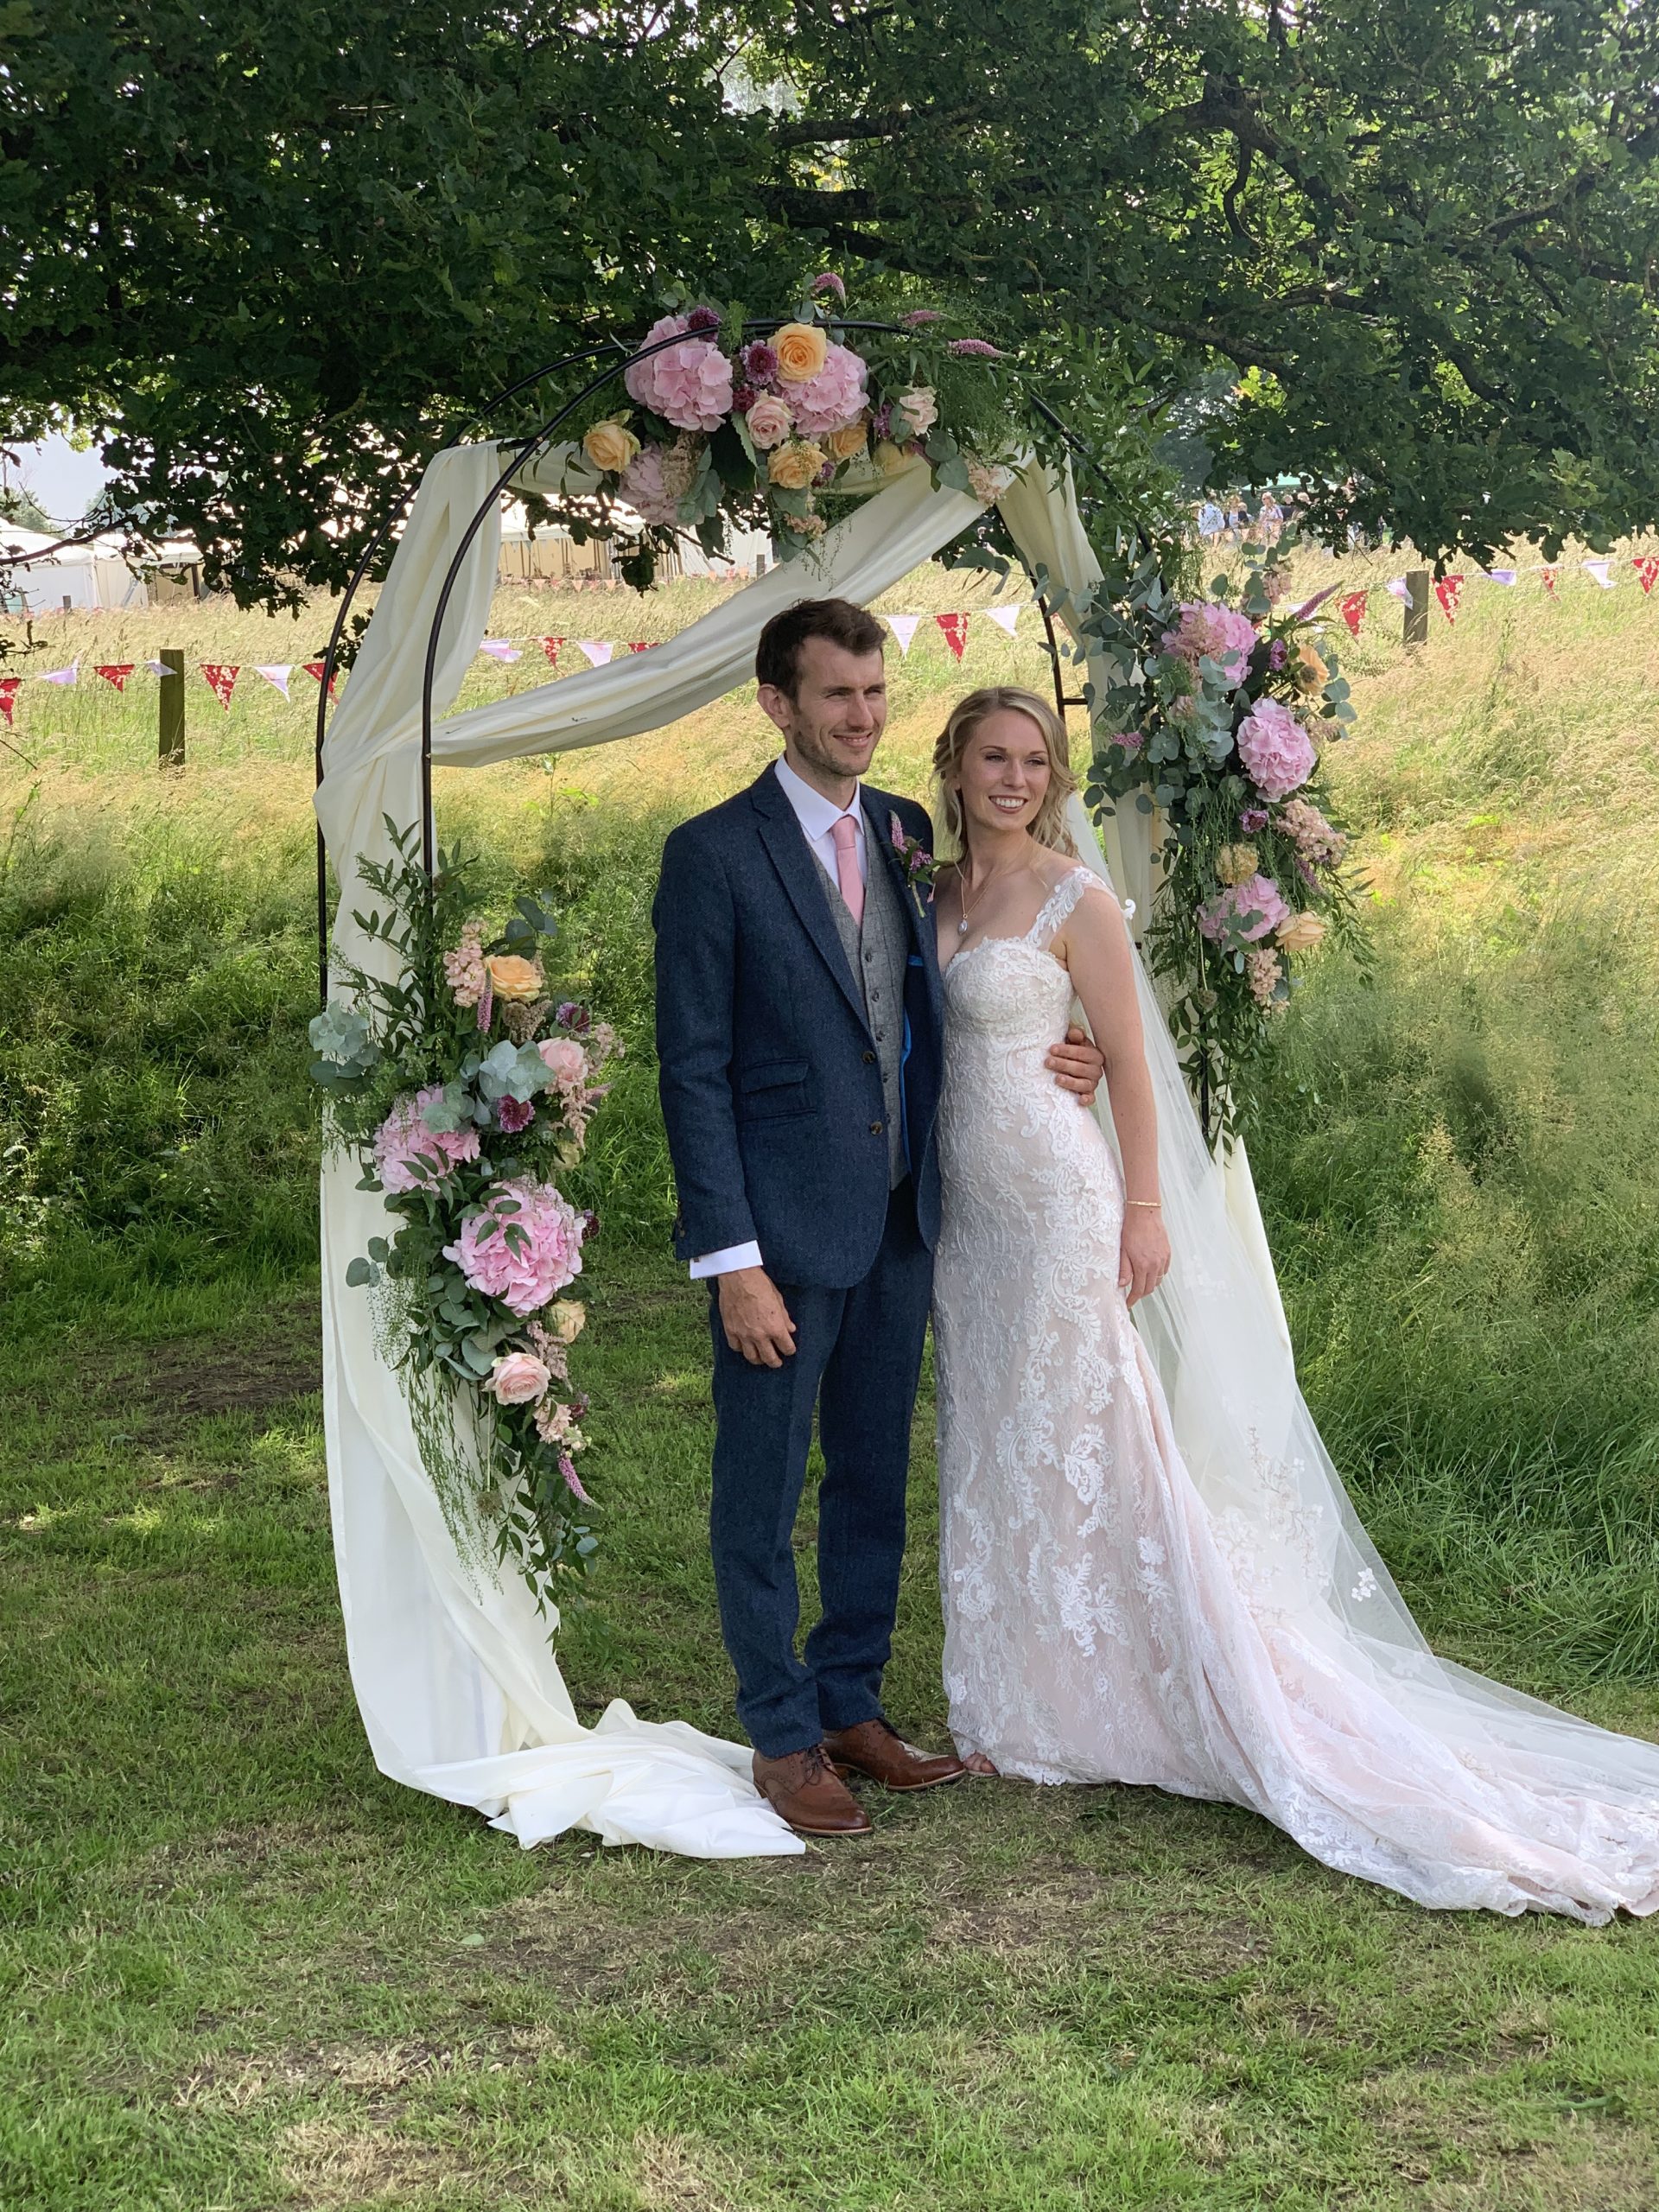 Bride and Groom standing underneath flower arch in a field